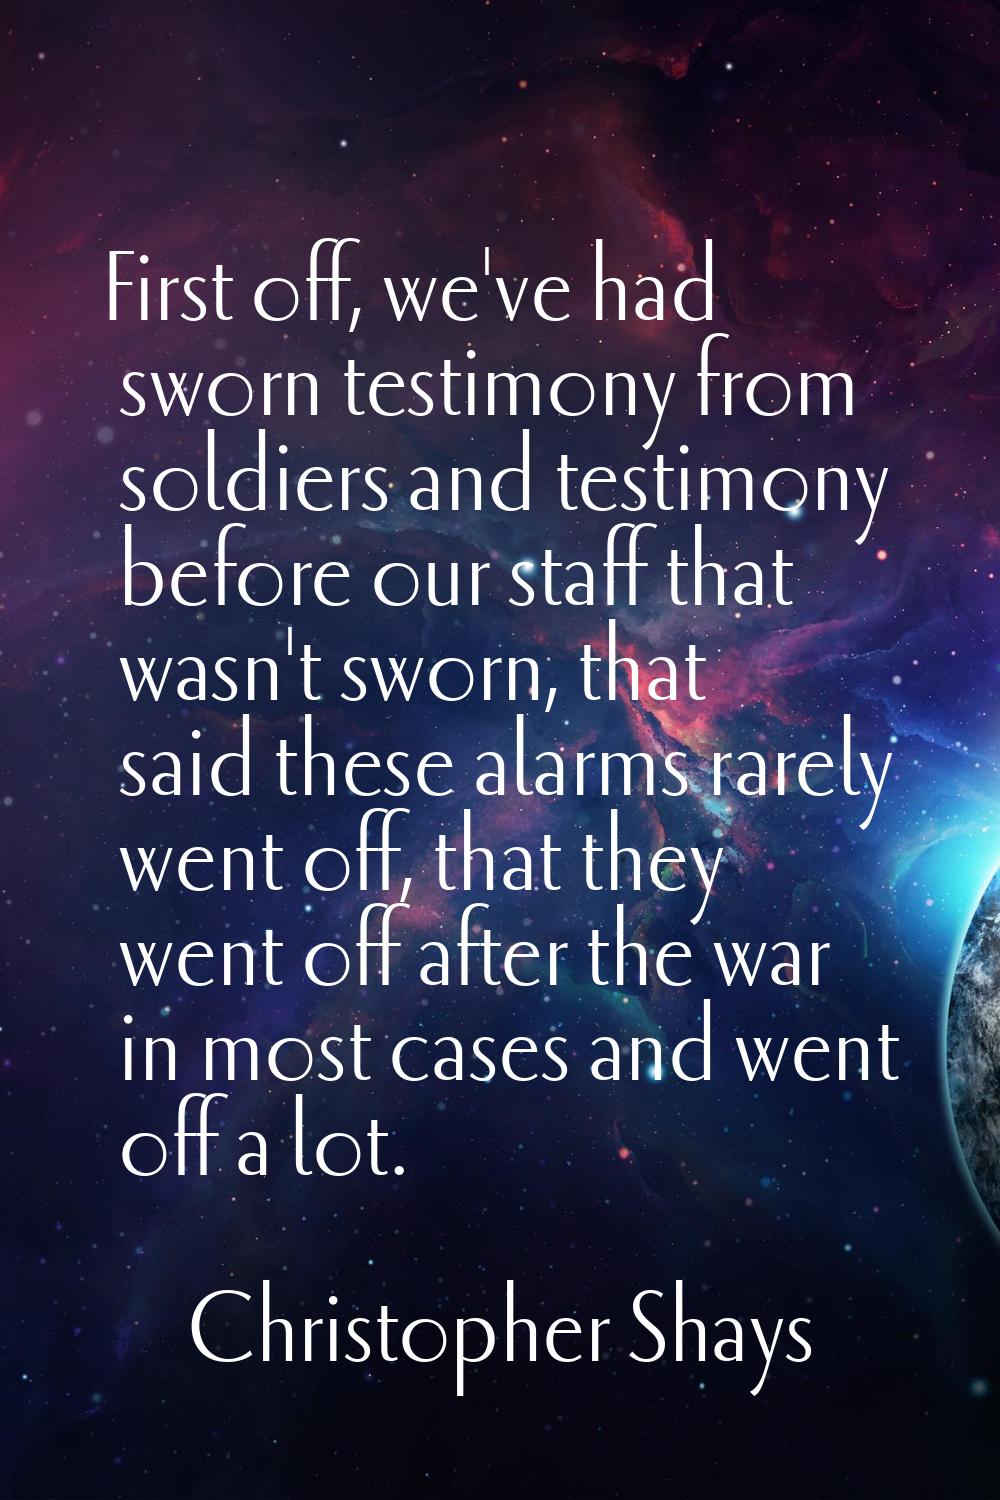 First off, we've had sworn testimony from soldiers and testimony before our staff that wasn't sworn